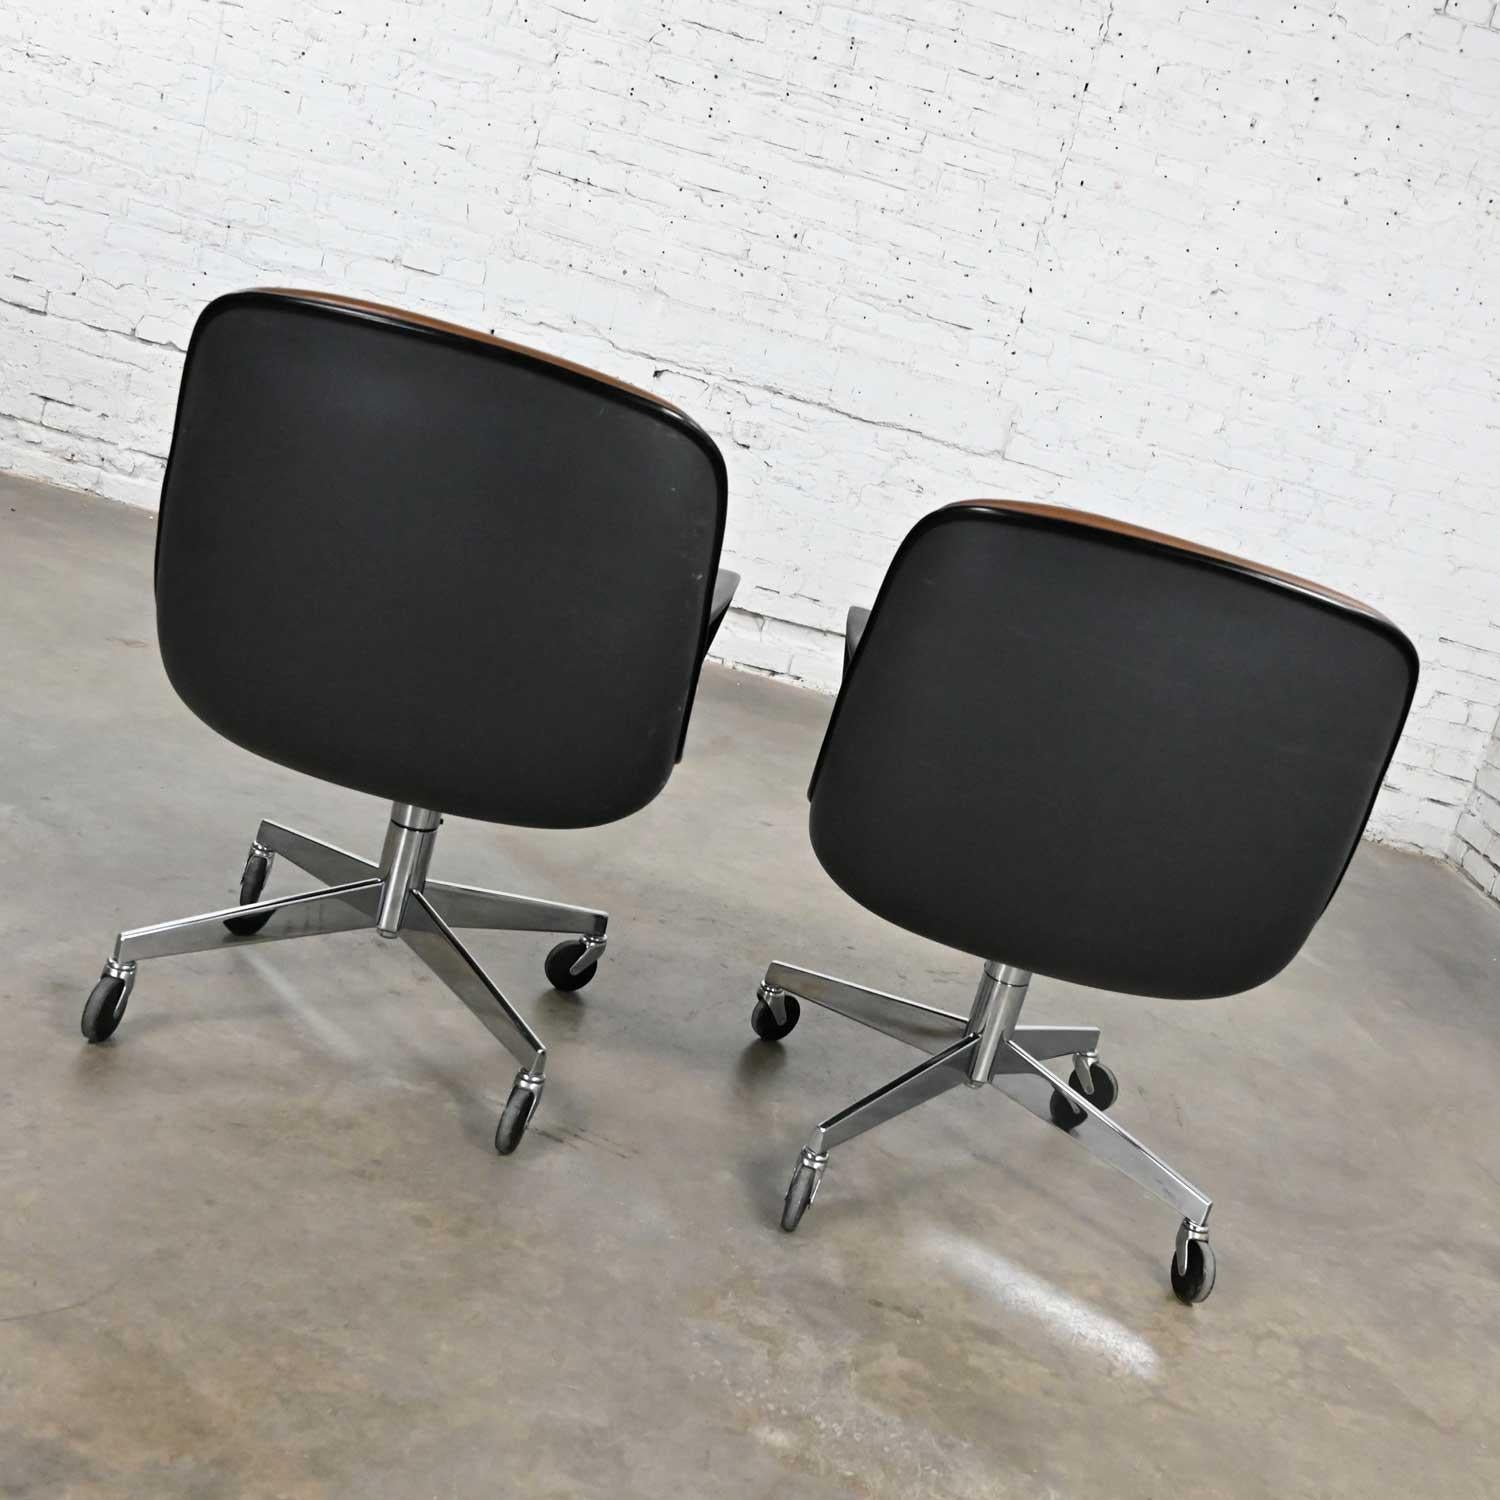 American Brown Vinyl Faux Leather Pair Steelcase 451 Rolling Office Chairs Style Pollock For Sale